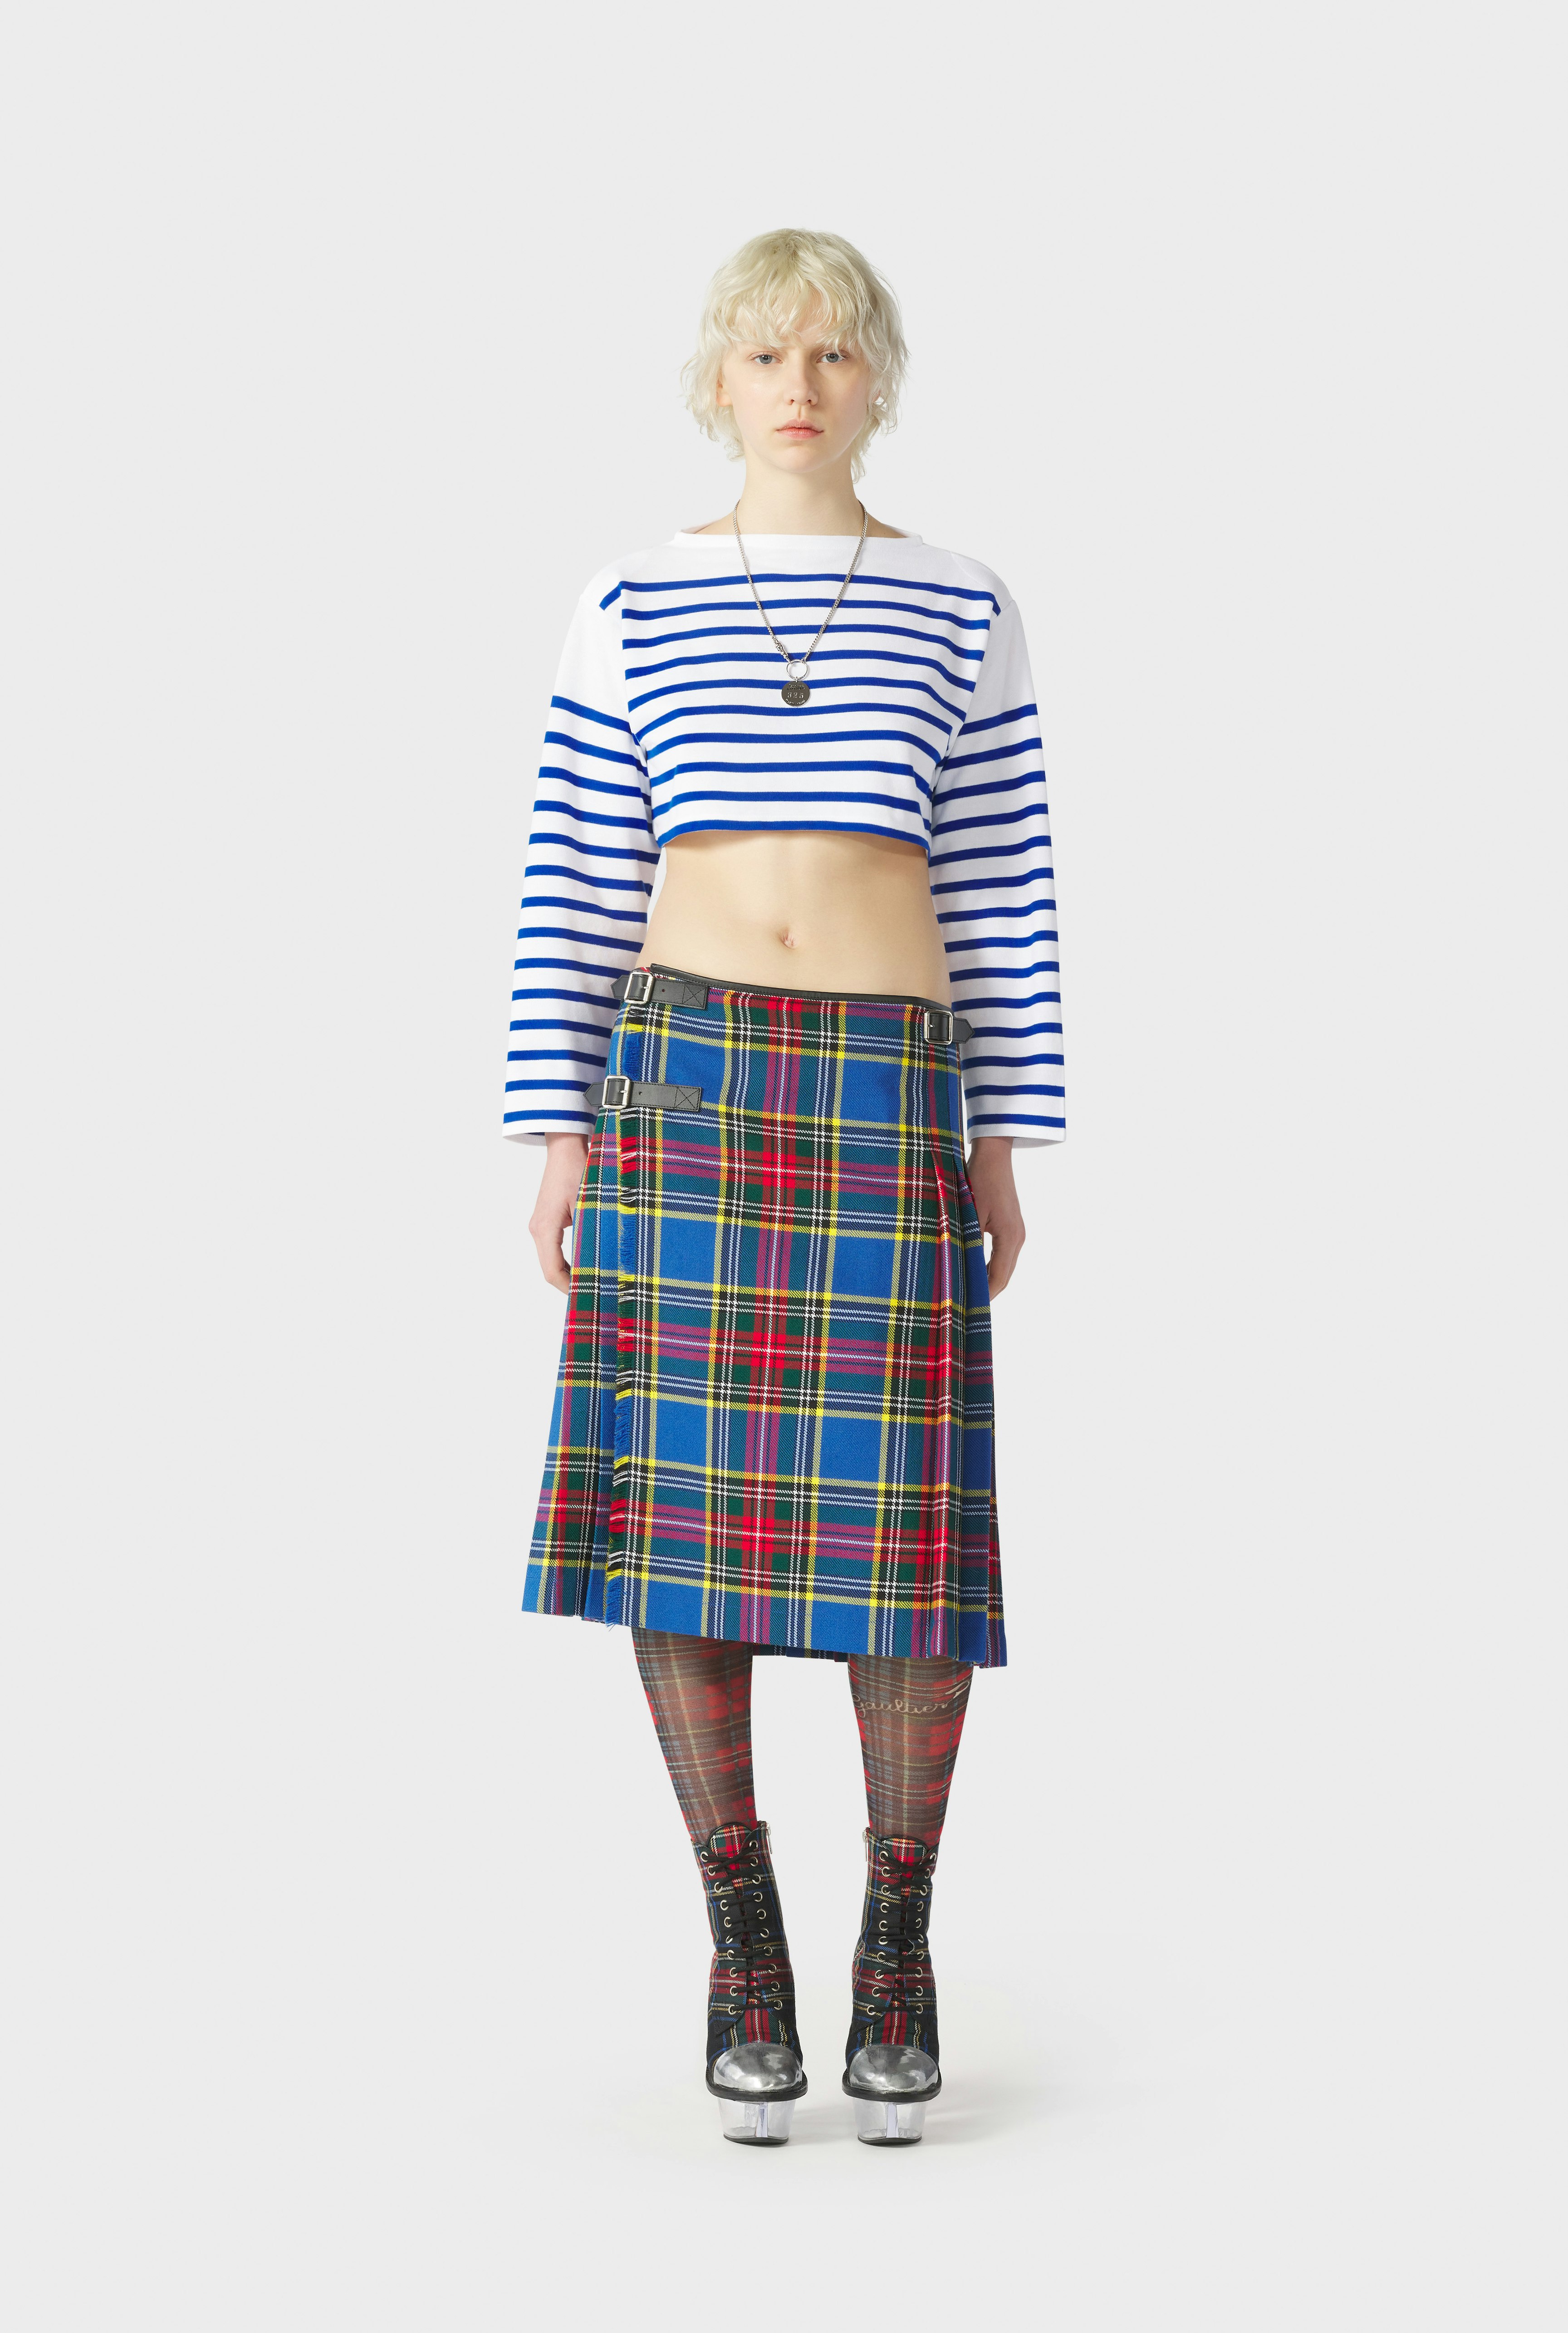 The Marinière Crop Top hover